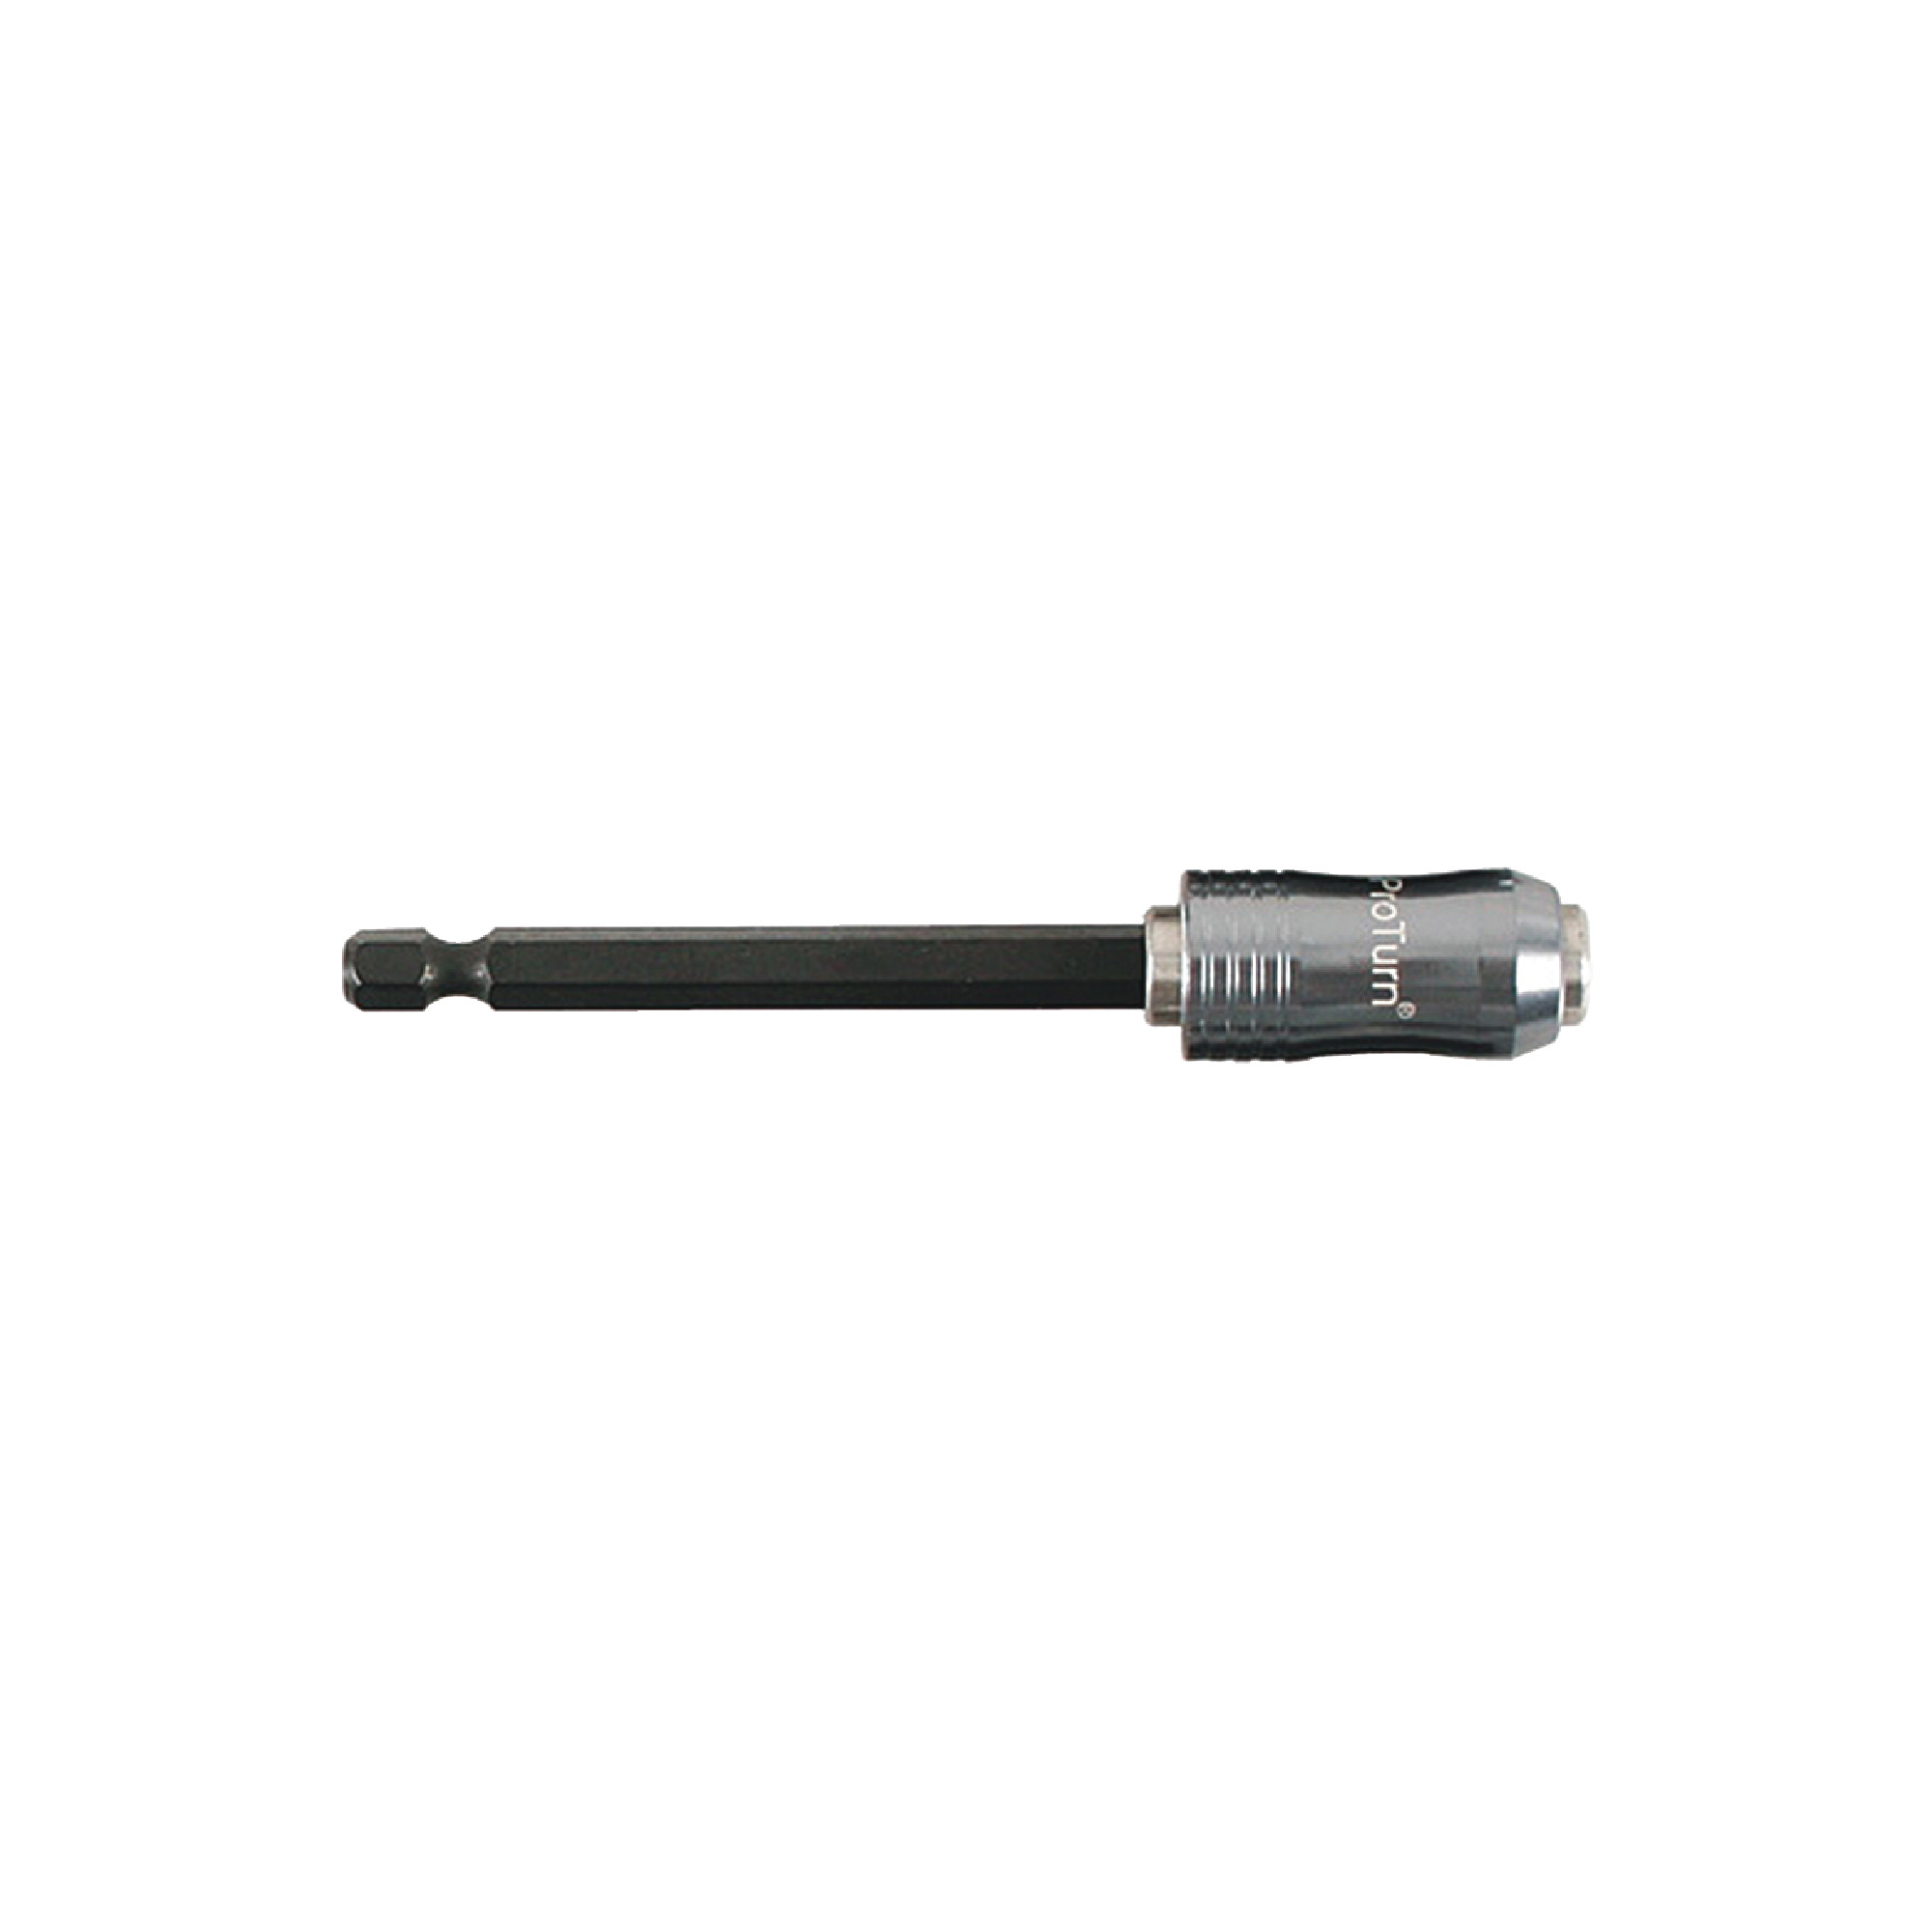 WIHA PRO TURN 1/4" Quick Release Bit Holder with Magnet - 7.8" Overall Length